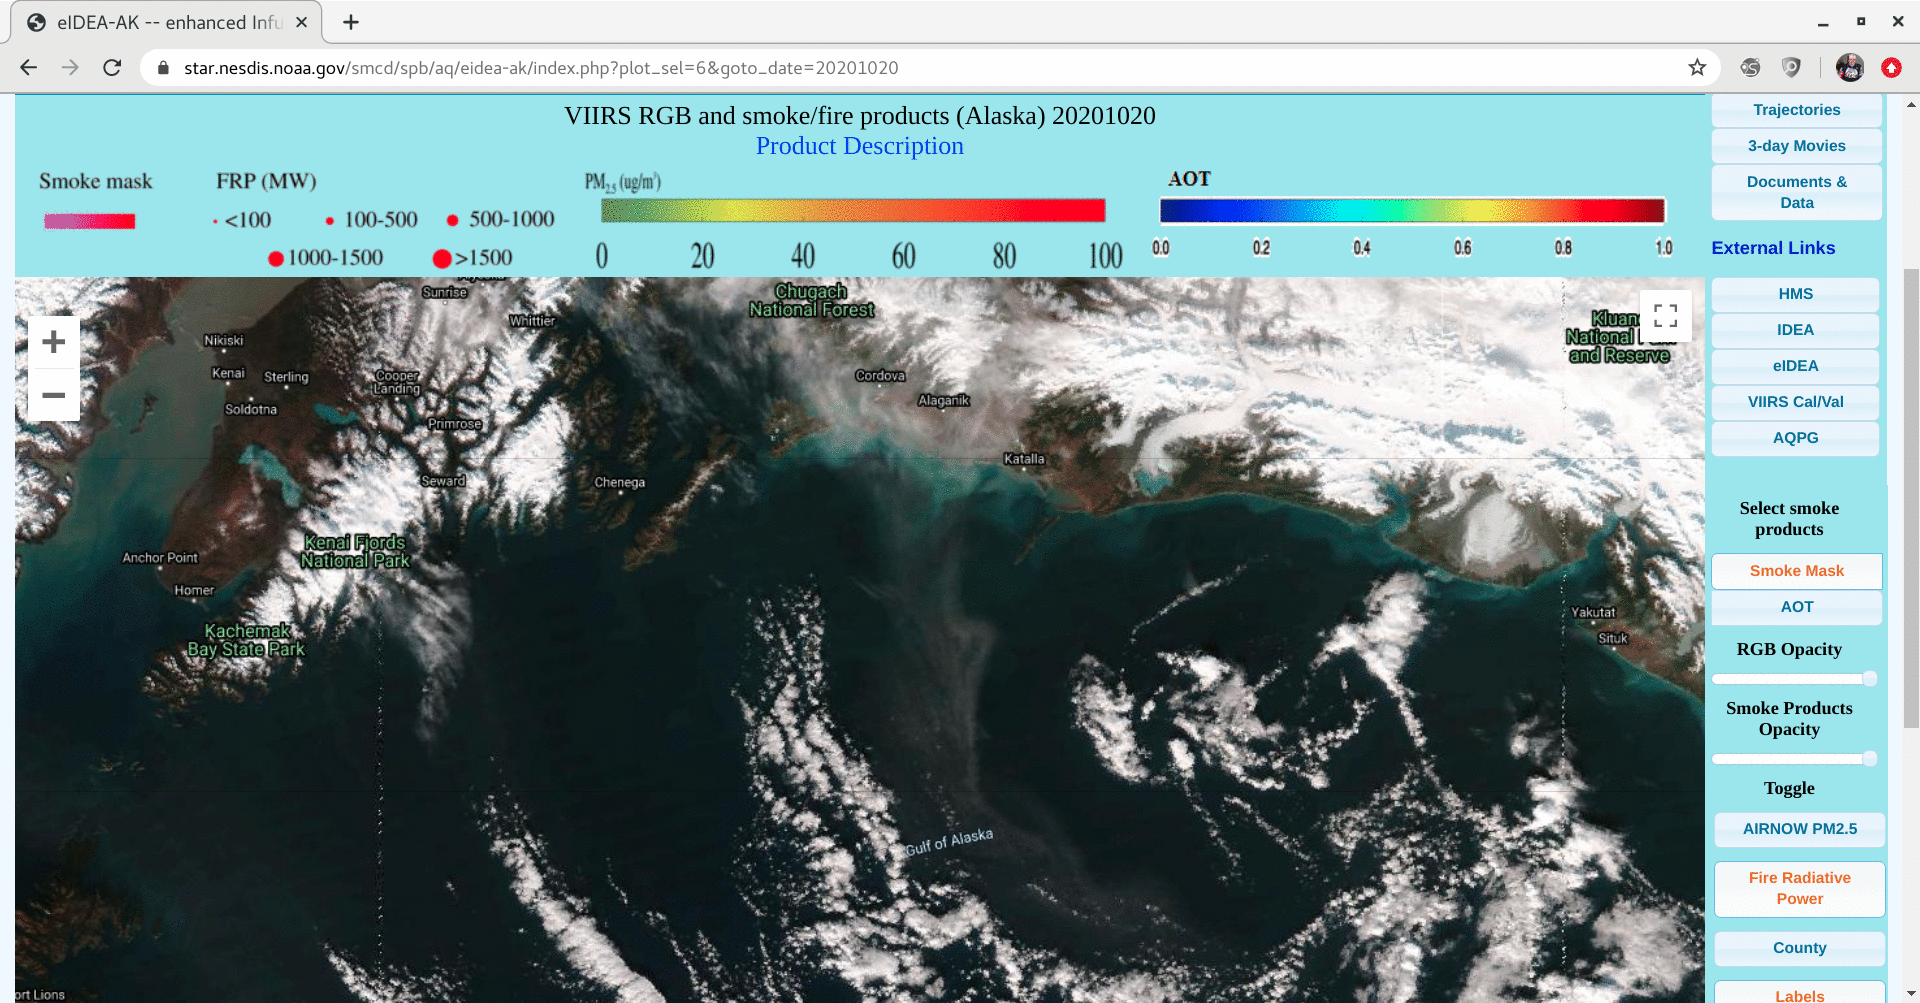 VIIRS True Color RGB and Aerosol Optical Thickness images [click to enlarge]